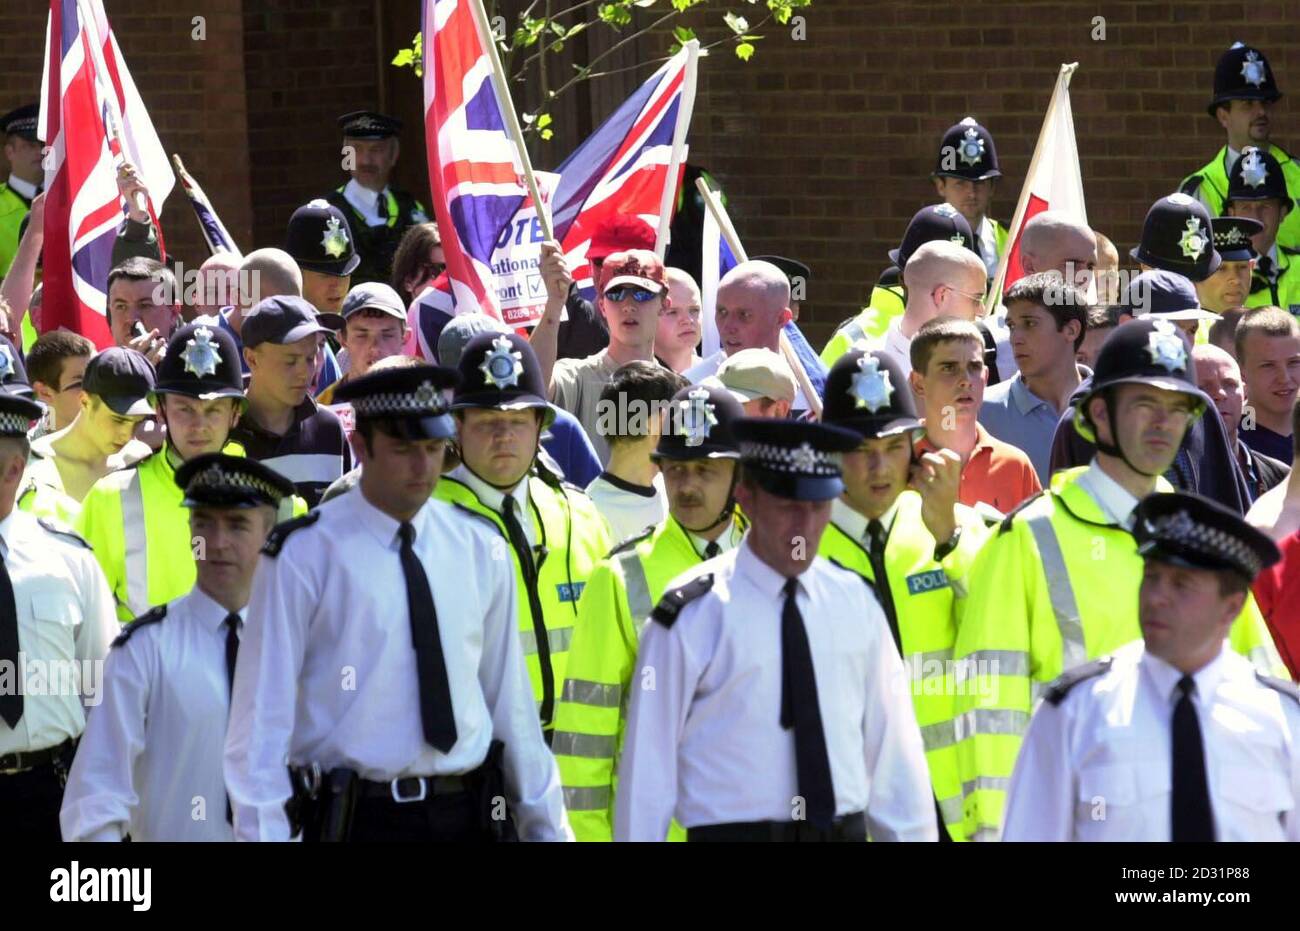 The National Front holding its third march this year through the streets of Bermondsey, London amid a strong police presence. The marches have angered community leaders who believe that the National Front is trying to stir up racial tension in the area. Stock Photo